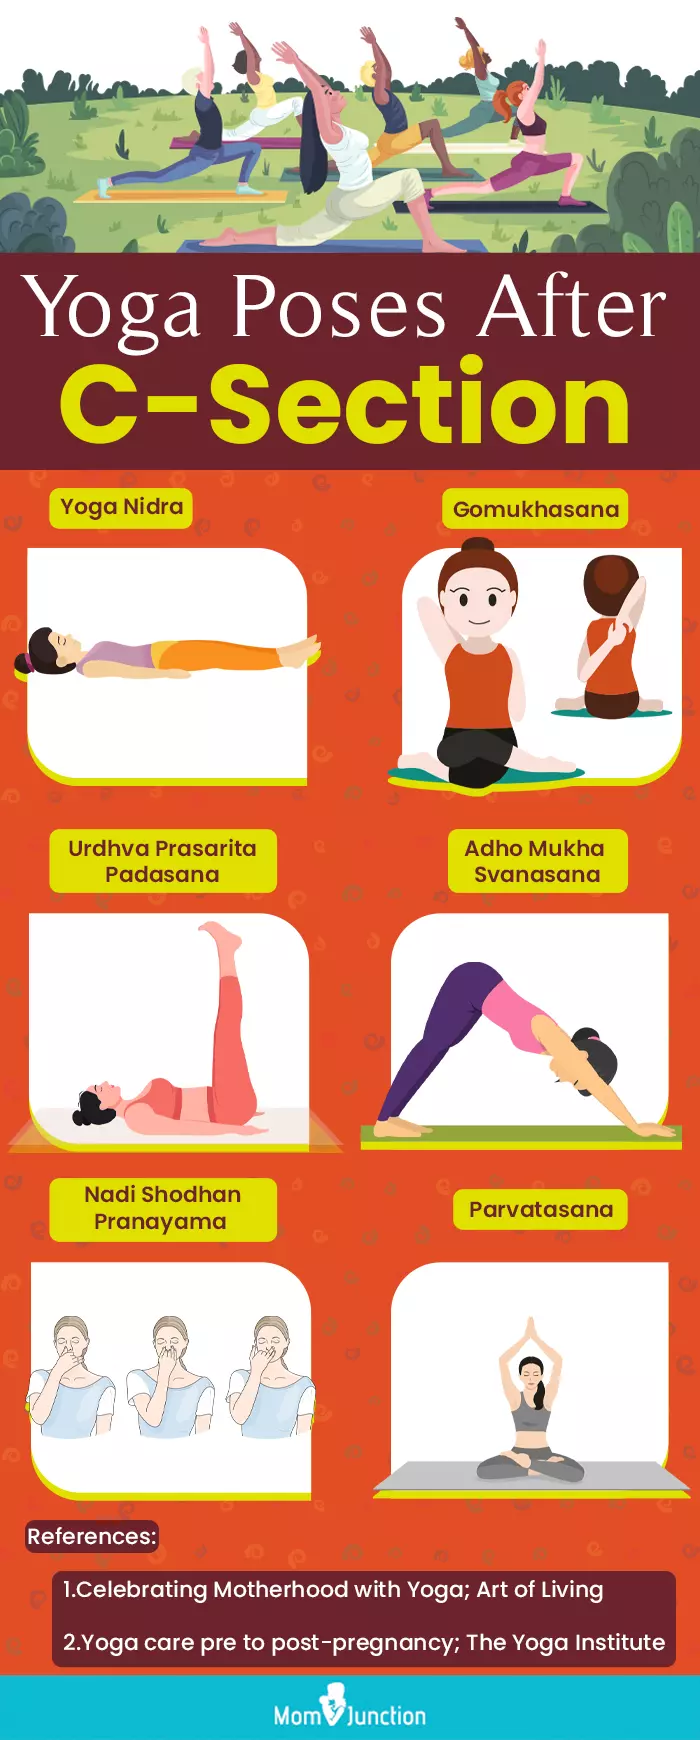 yoga poses after c section (infographic)